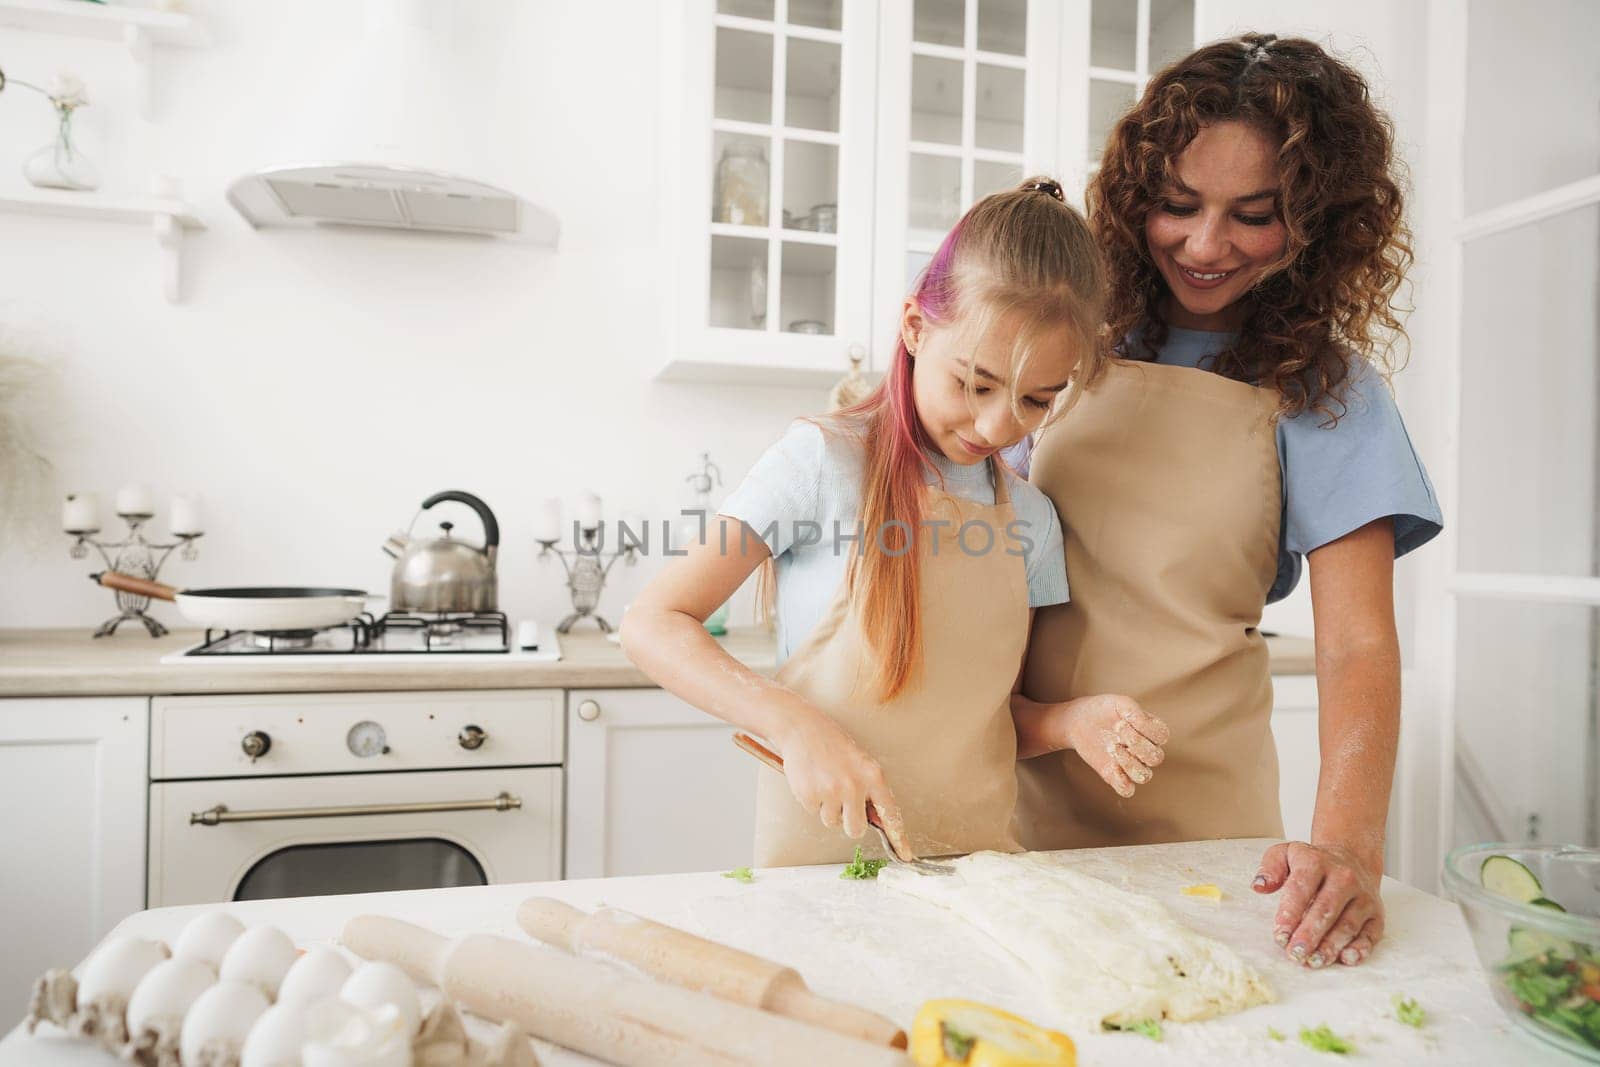 Mother and daughter having fun while cooking dough in kitchen, close up